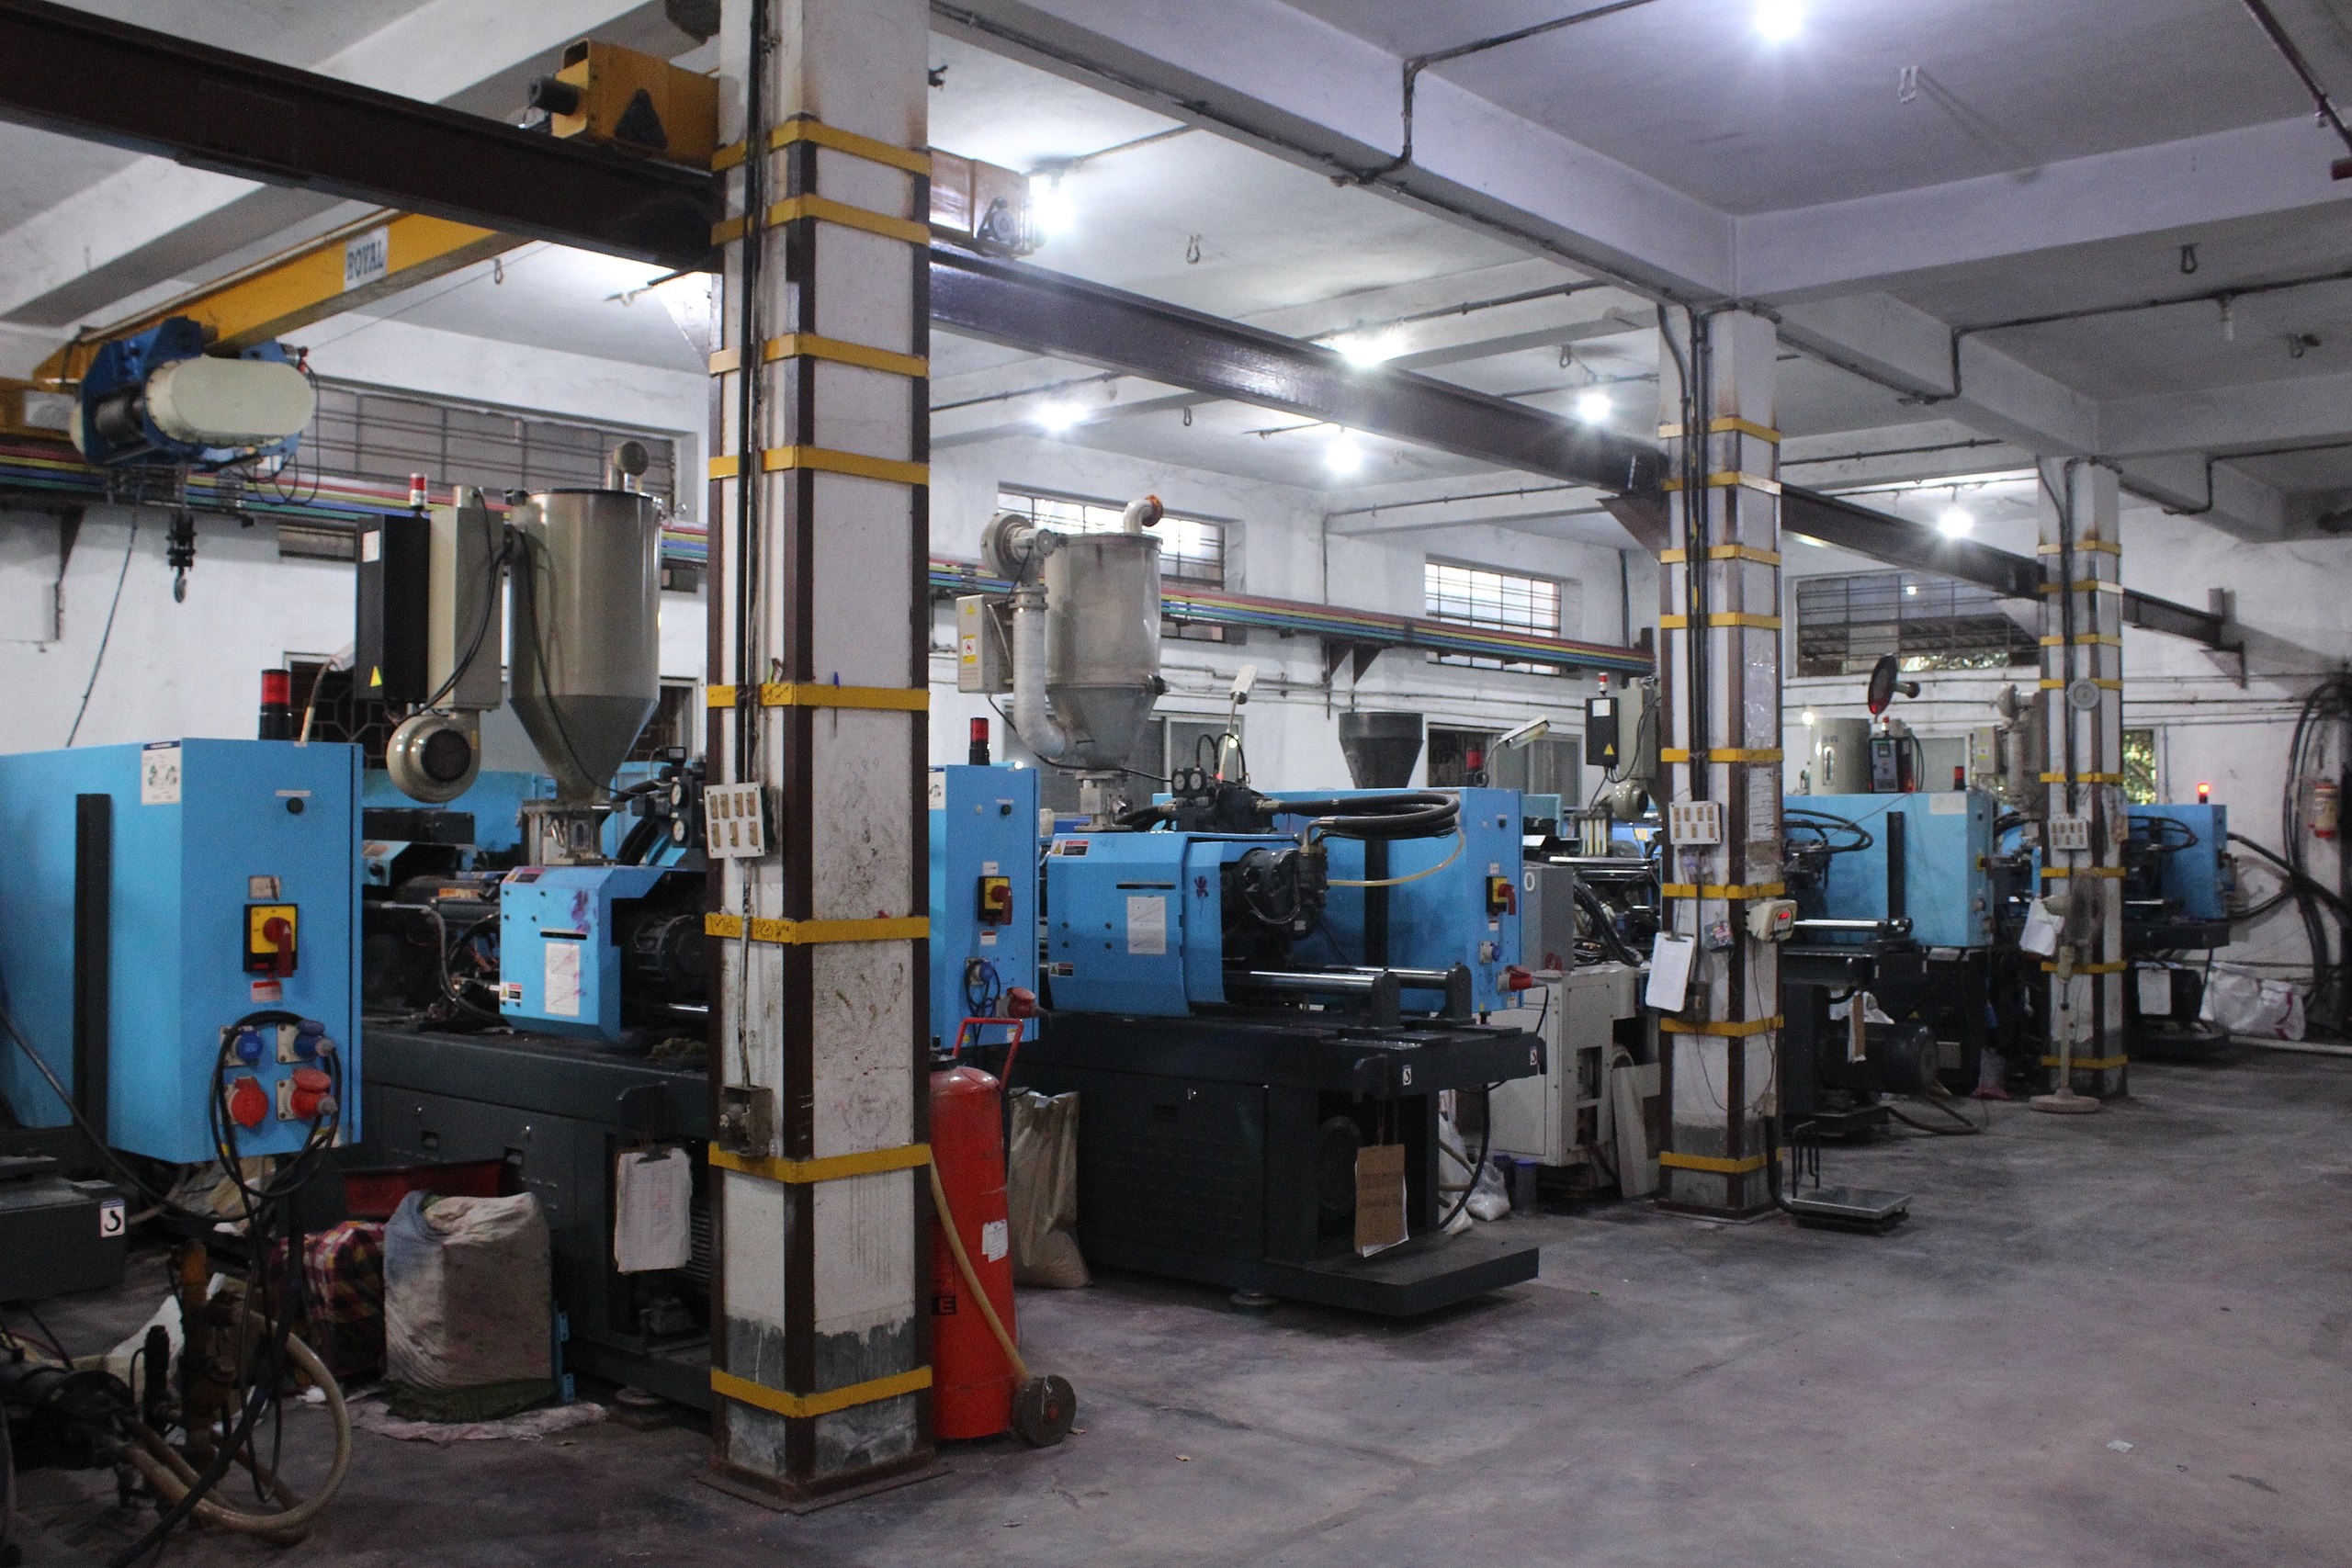 Photo of industrial machinery in a factory